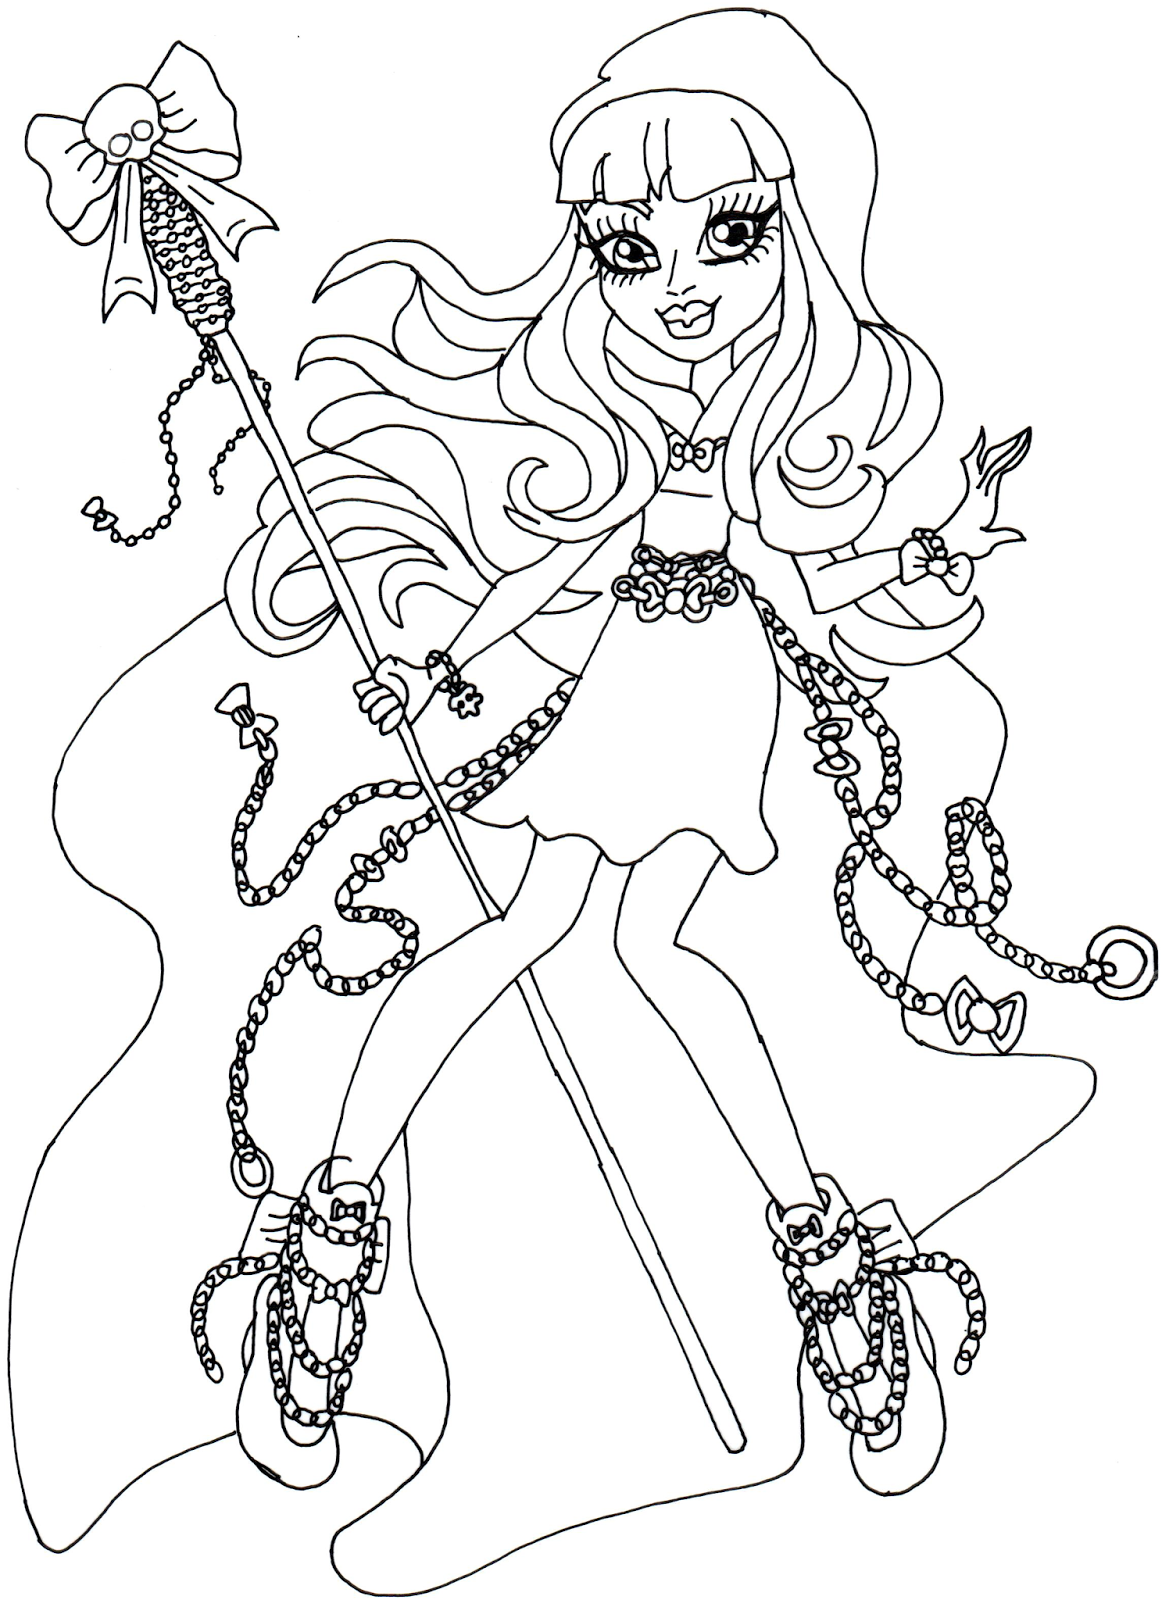 Download Free Printable Monster High Coloring Pages: River Styxx Monster High Coloring Page